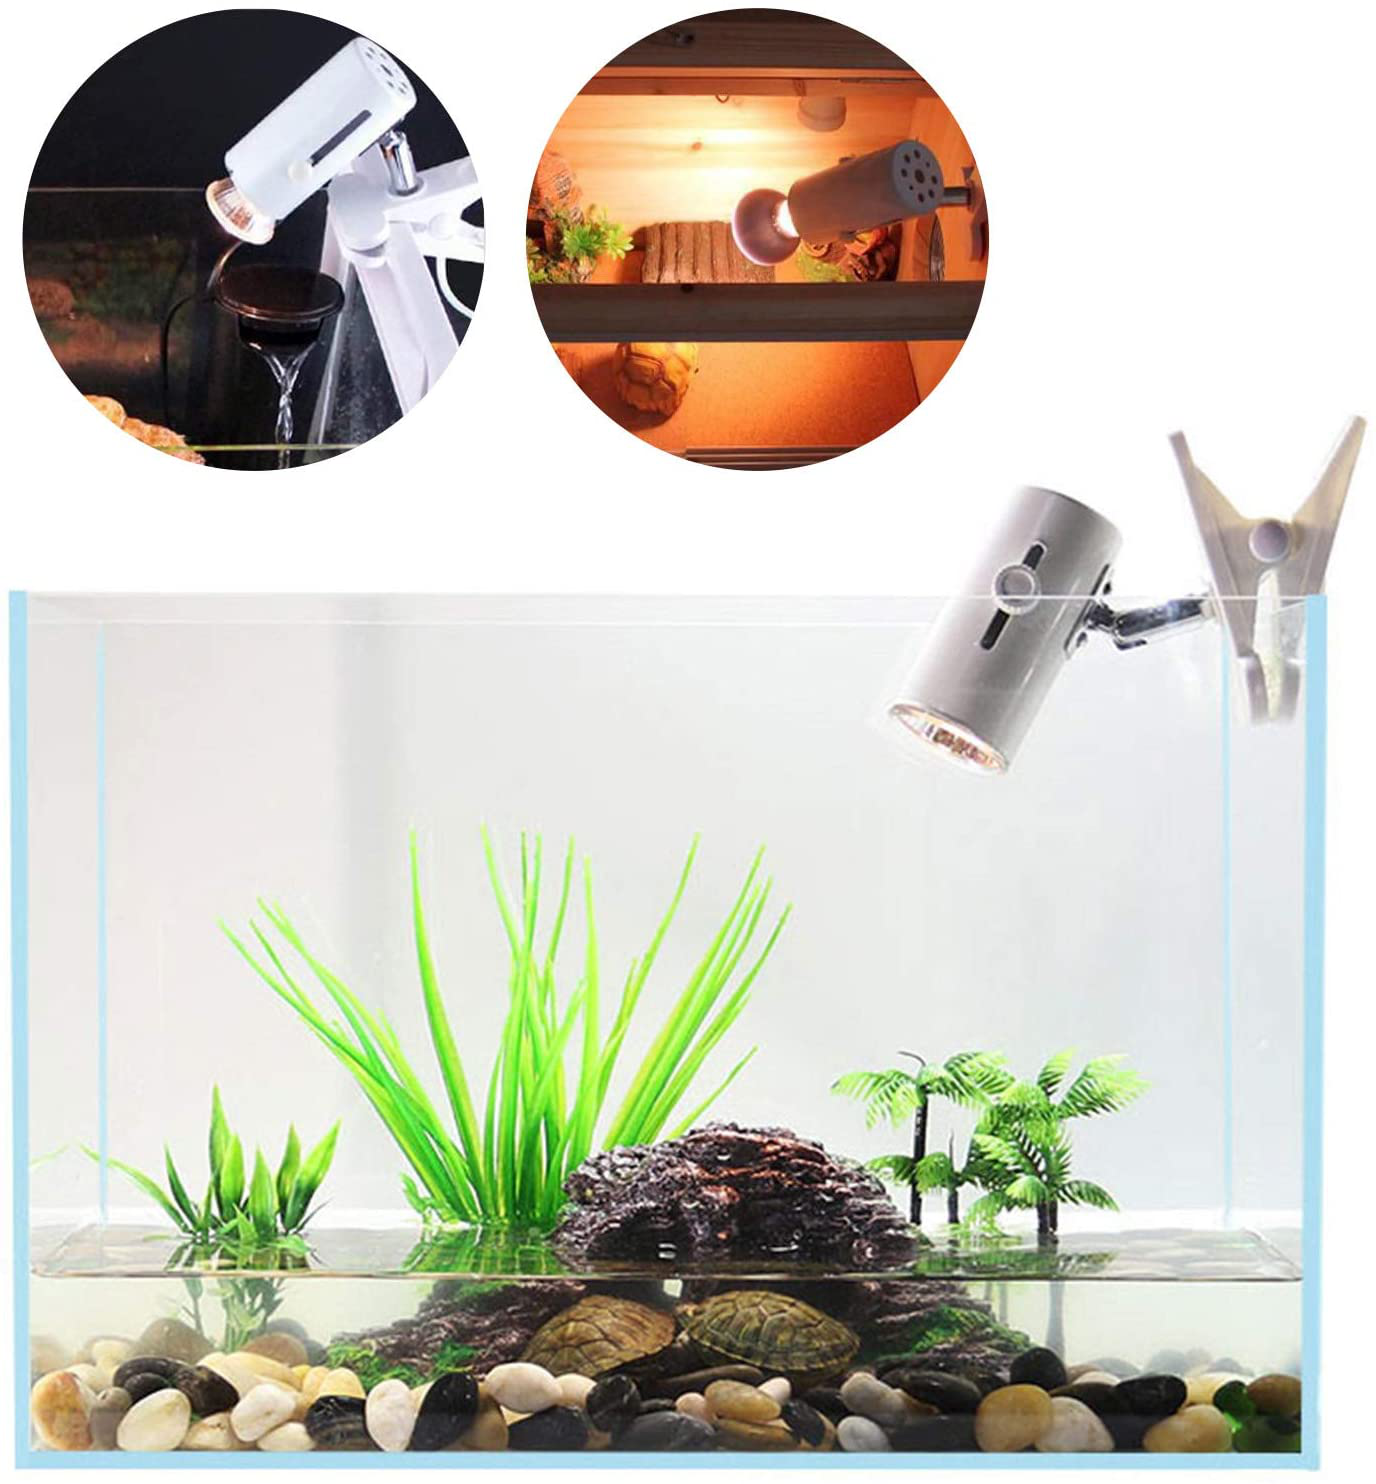 Reptile Clamp Heat Lamp Fixture Holder,White Adjustable Flexible Clamp Clip on Habitat Bulb Holder Stand,Suitable for Aquarium, Reptiles,Brooder Coop,Turtle,Turtle,Snake(Bulb Not Included)